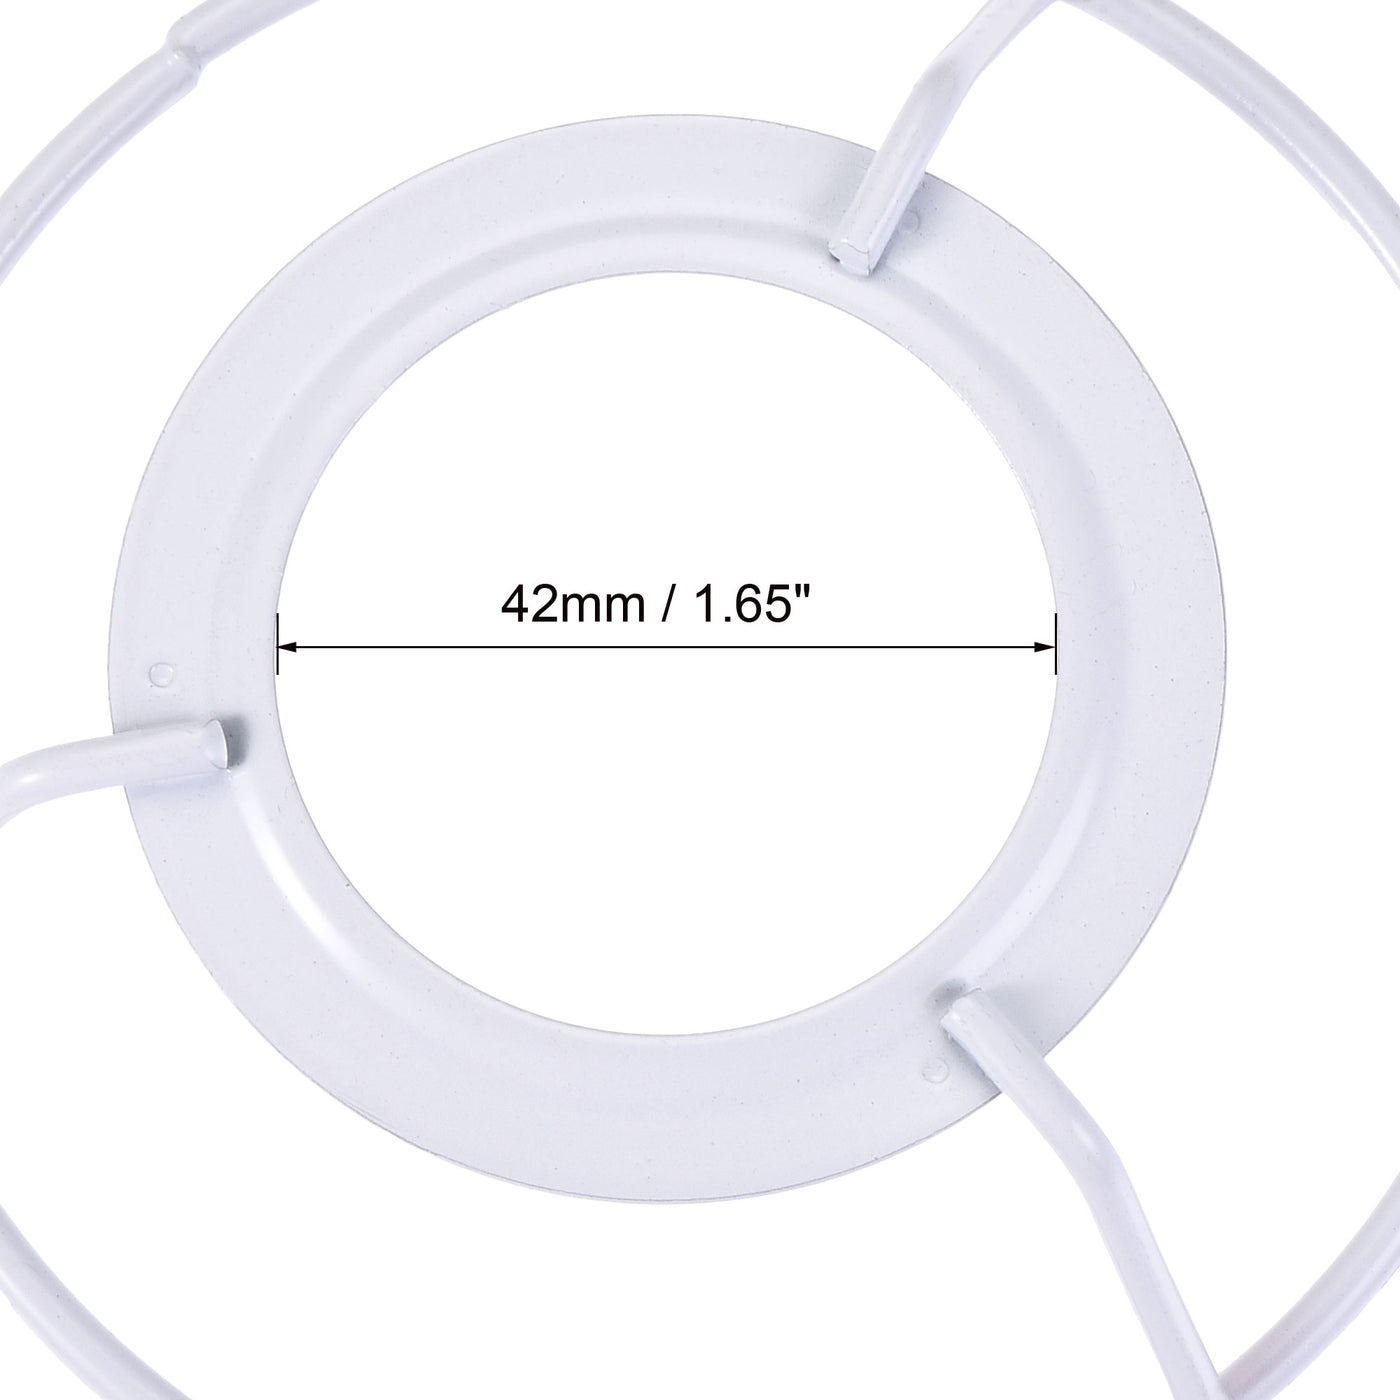 uxcell Uxcell Lamp Shade Ring, 100mm Dia. Lampshade Holder Frame Ring for E26/E27 Lamp Socket, Baked Coating Iron 1 Set